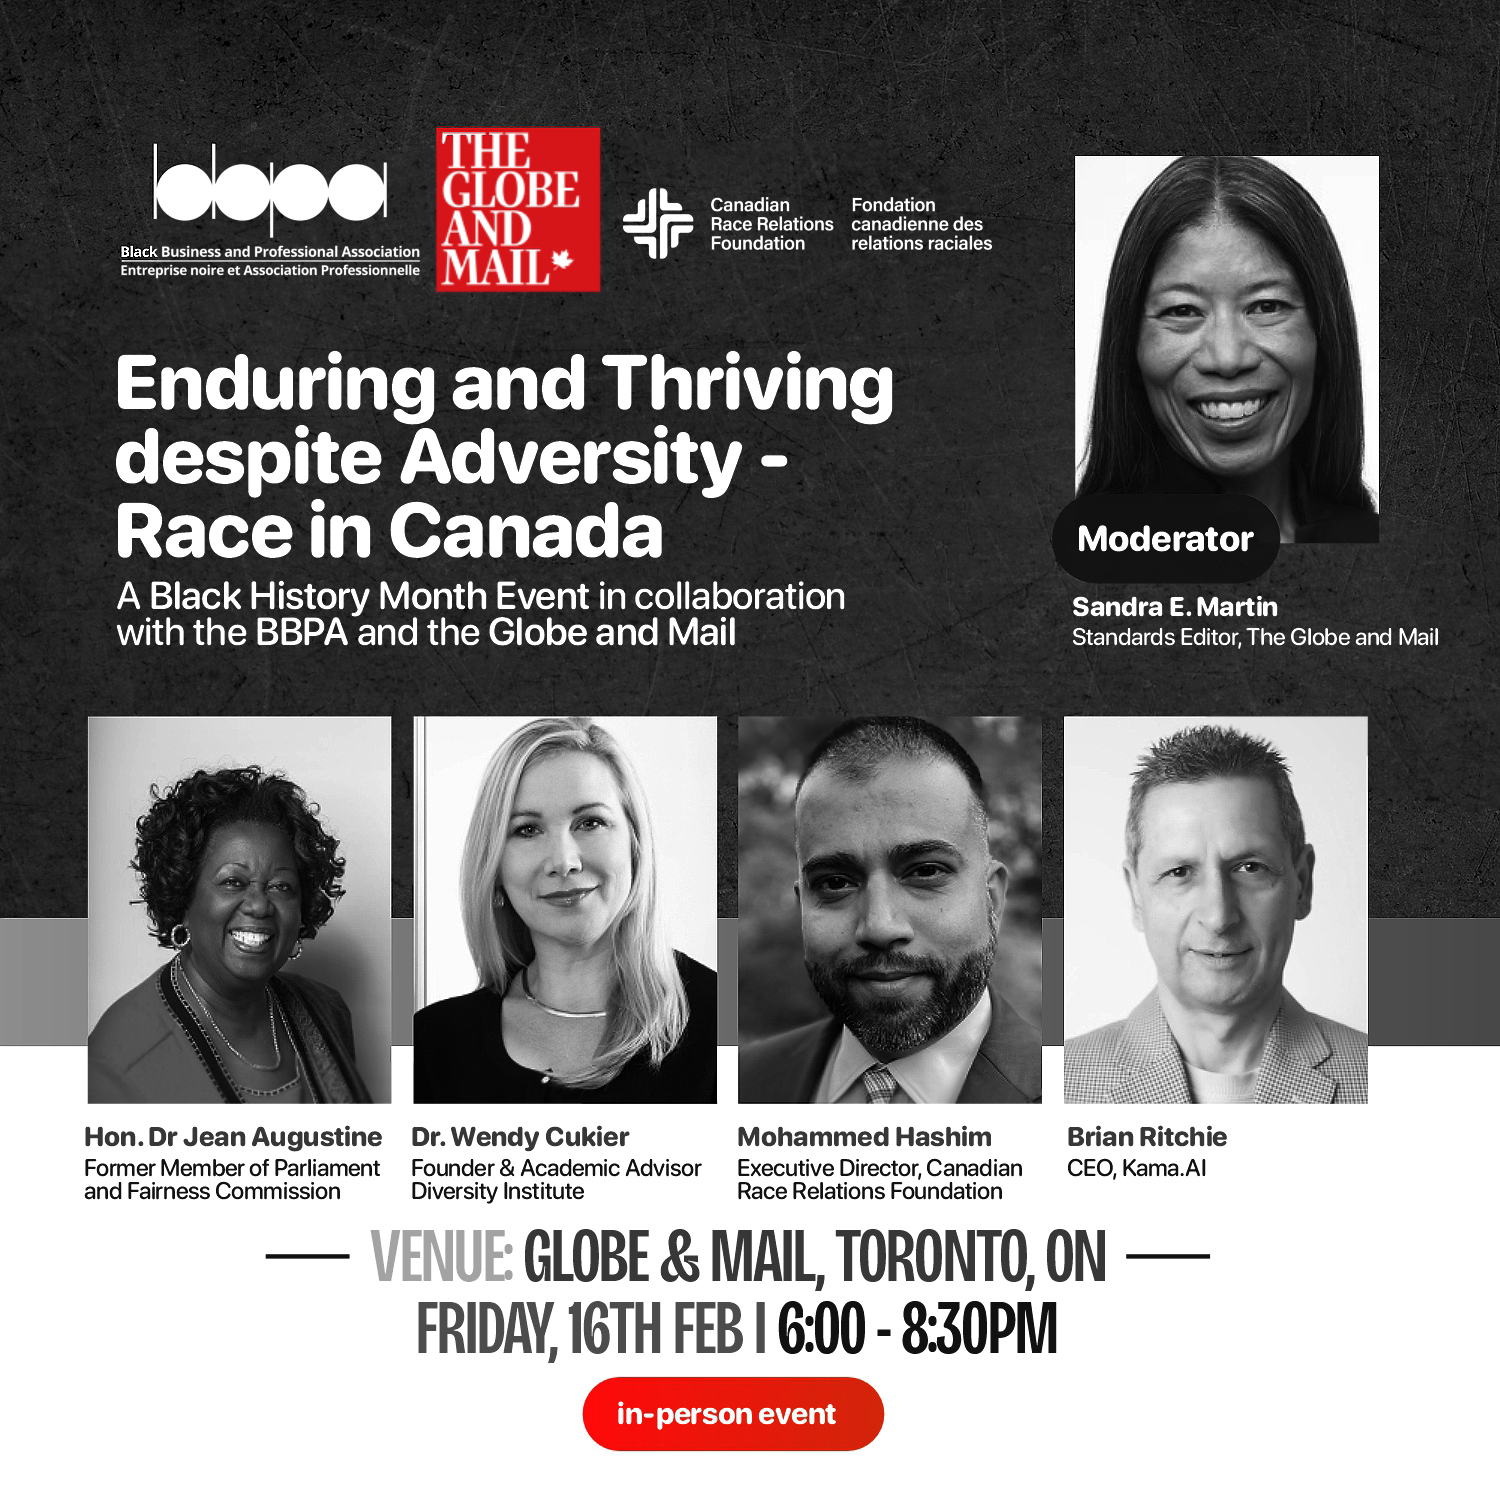 Enduring and Thriving Despite Adversity - Race in Canada event poster for the Globe and Mail.